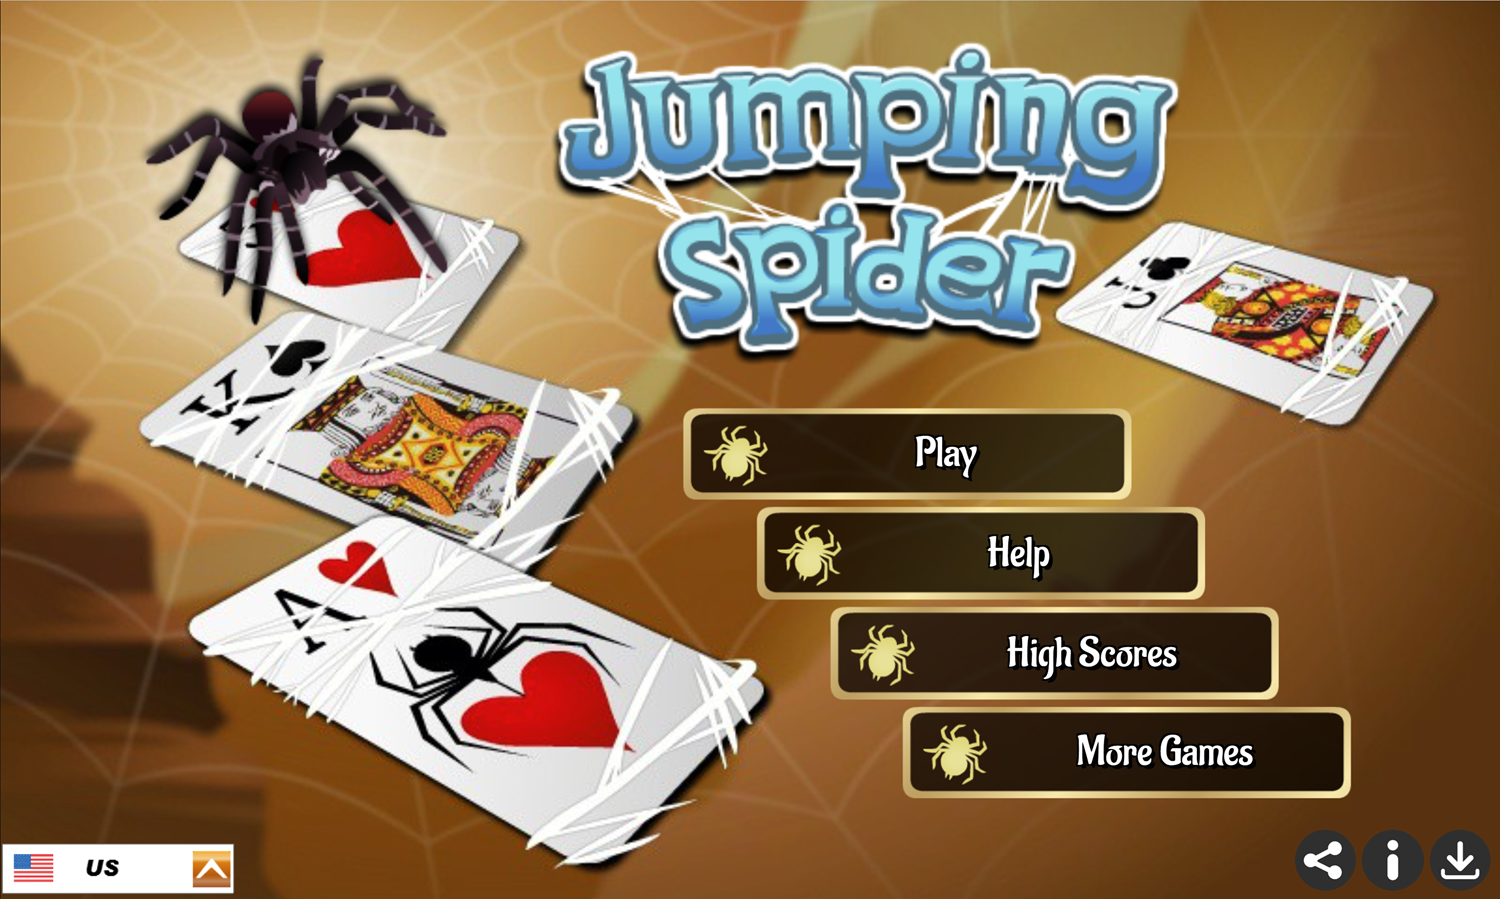 Jumping Spider Solitaire Game Welcome Screen Screenshot.